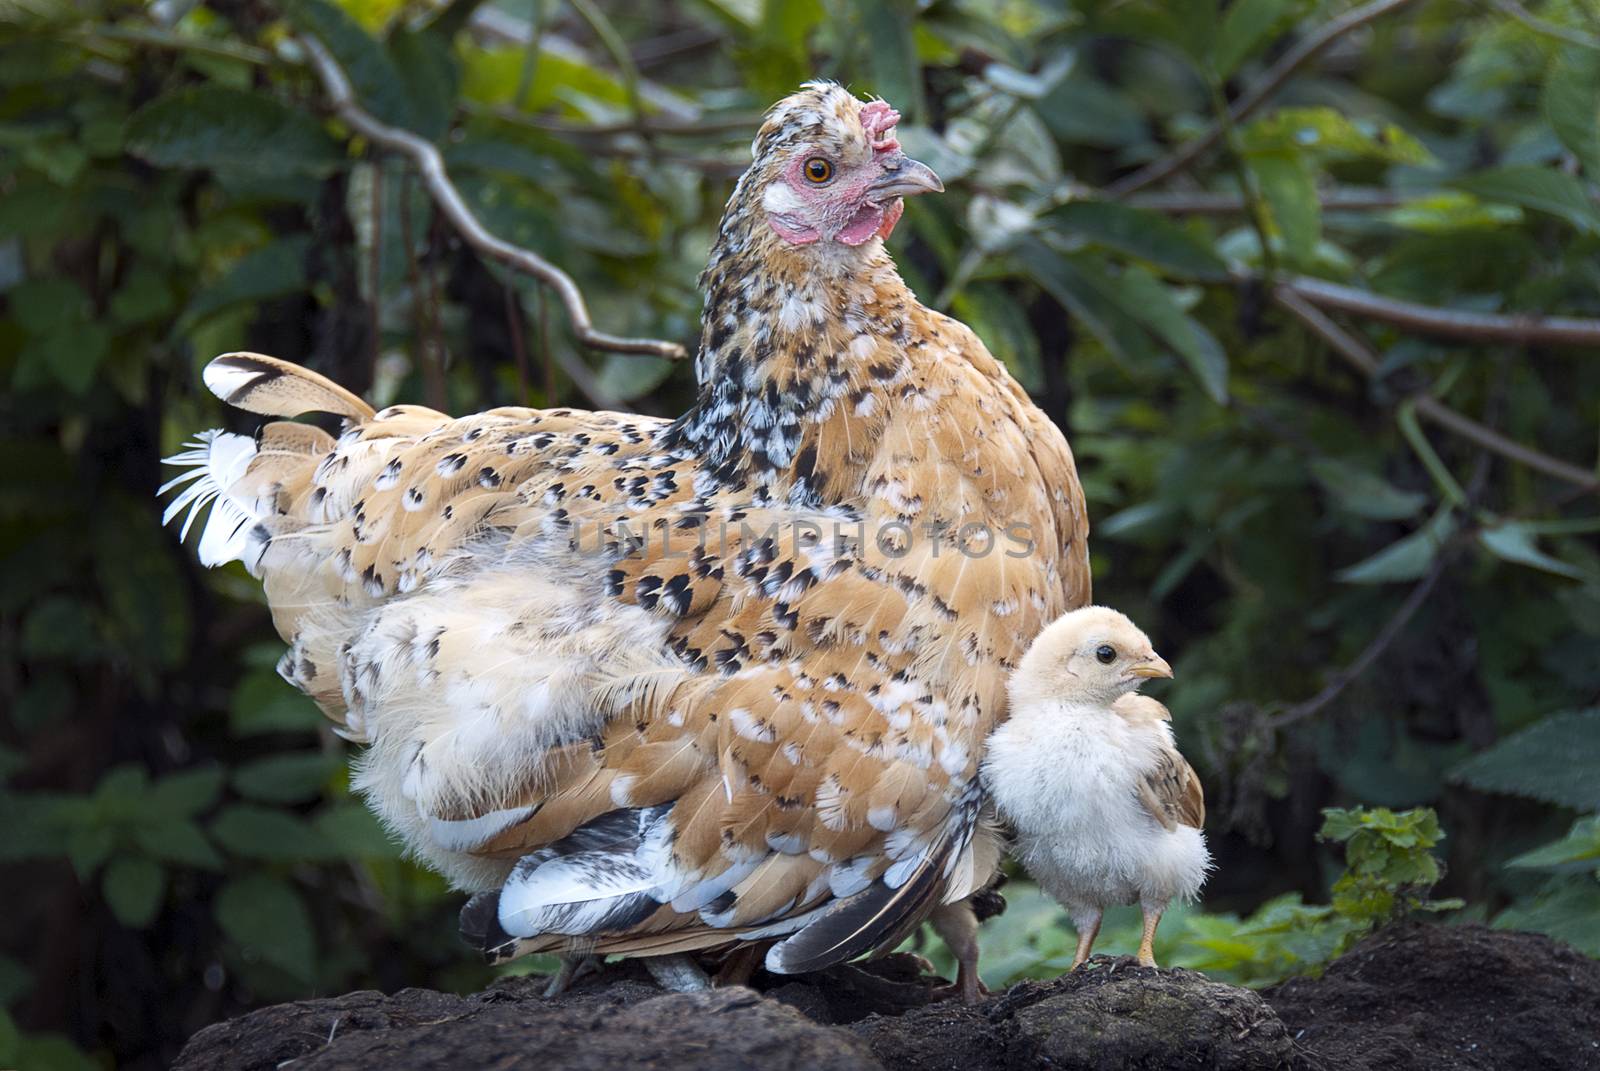 Hen with her chicks, protecting herself under her mother's feath by jalonsohu@gmail.com